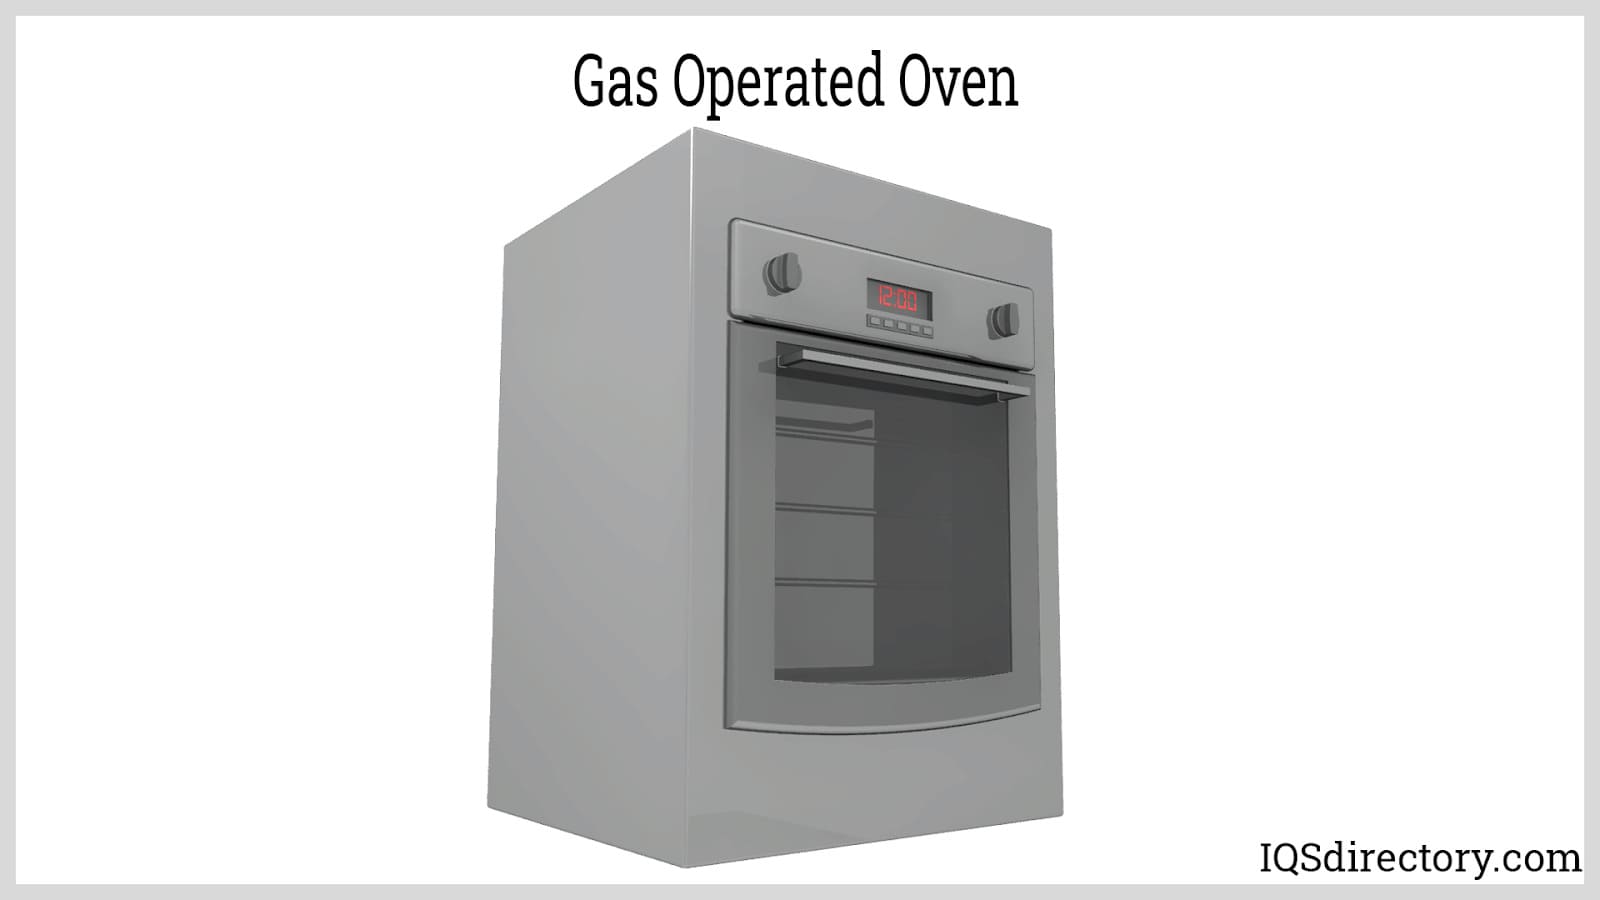 https://www.industrial-ovens.net/wp-content/uploads/2022/11/gas-operated-oven.jpg